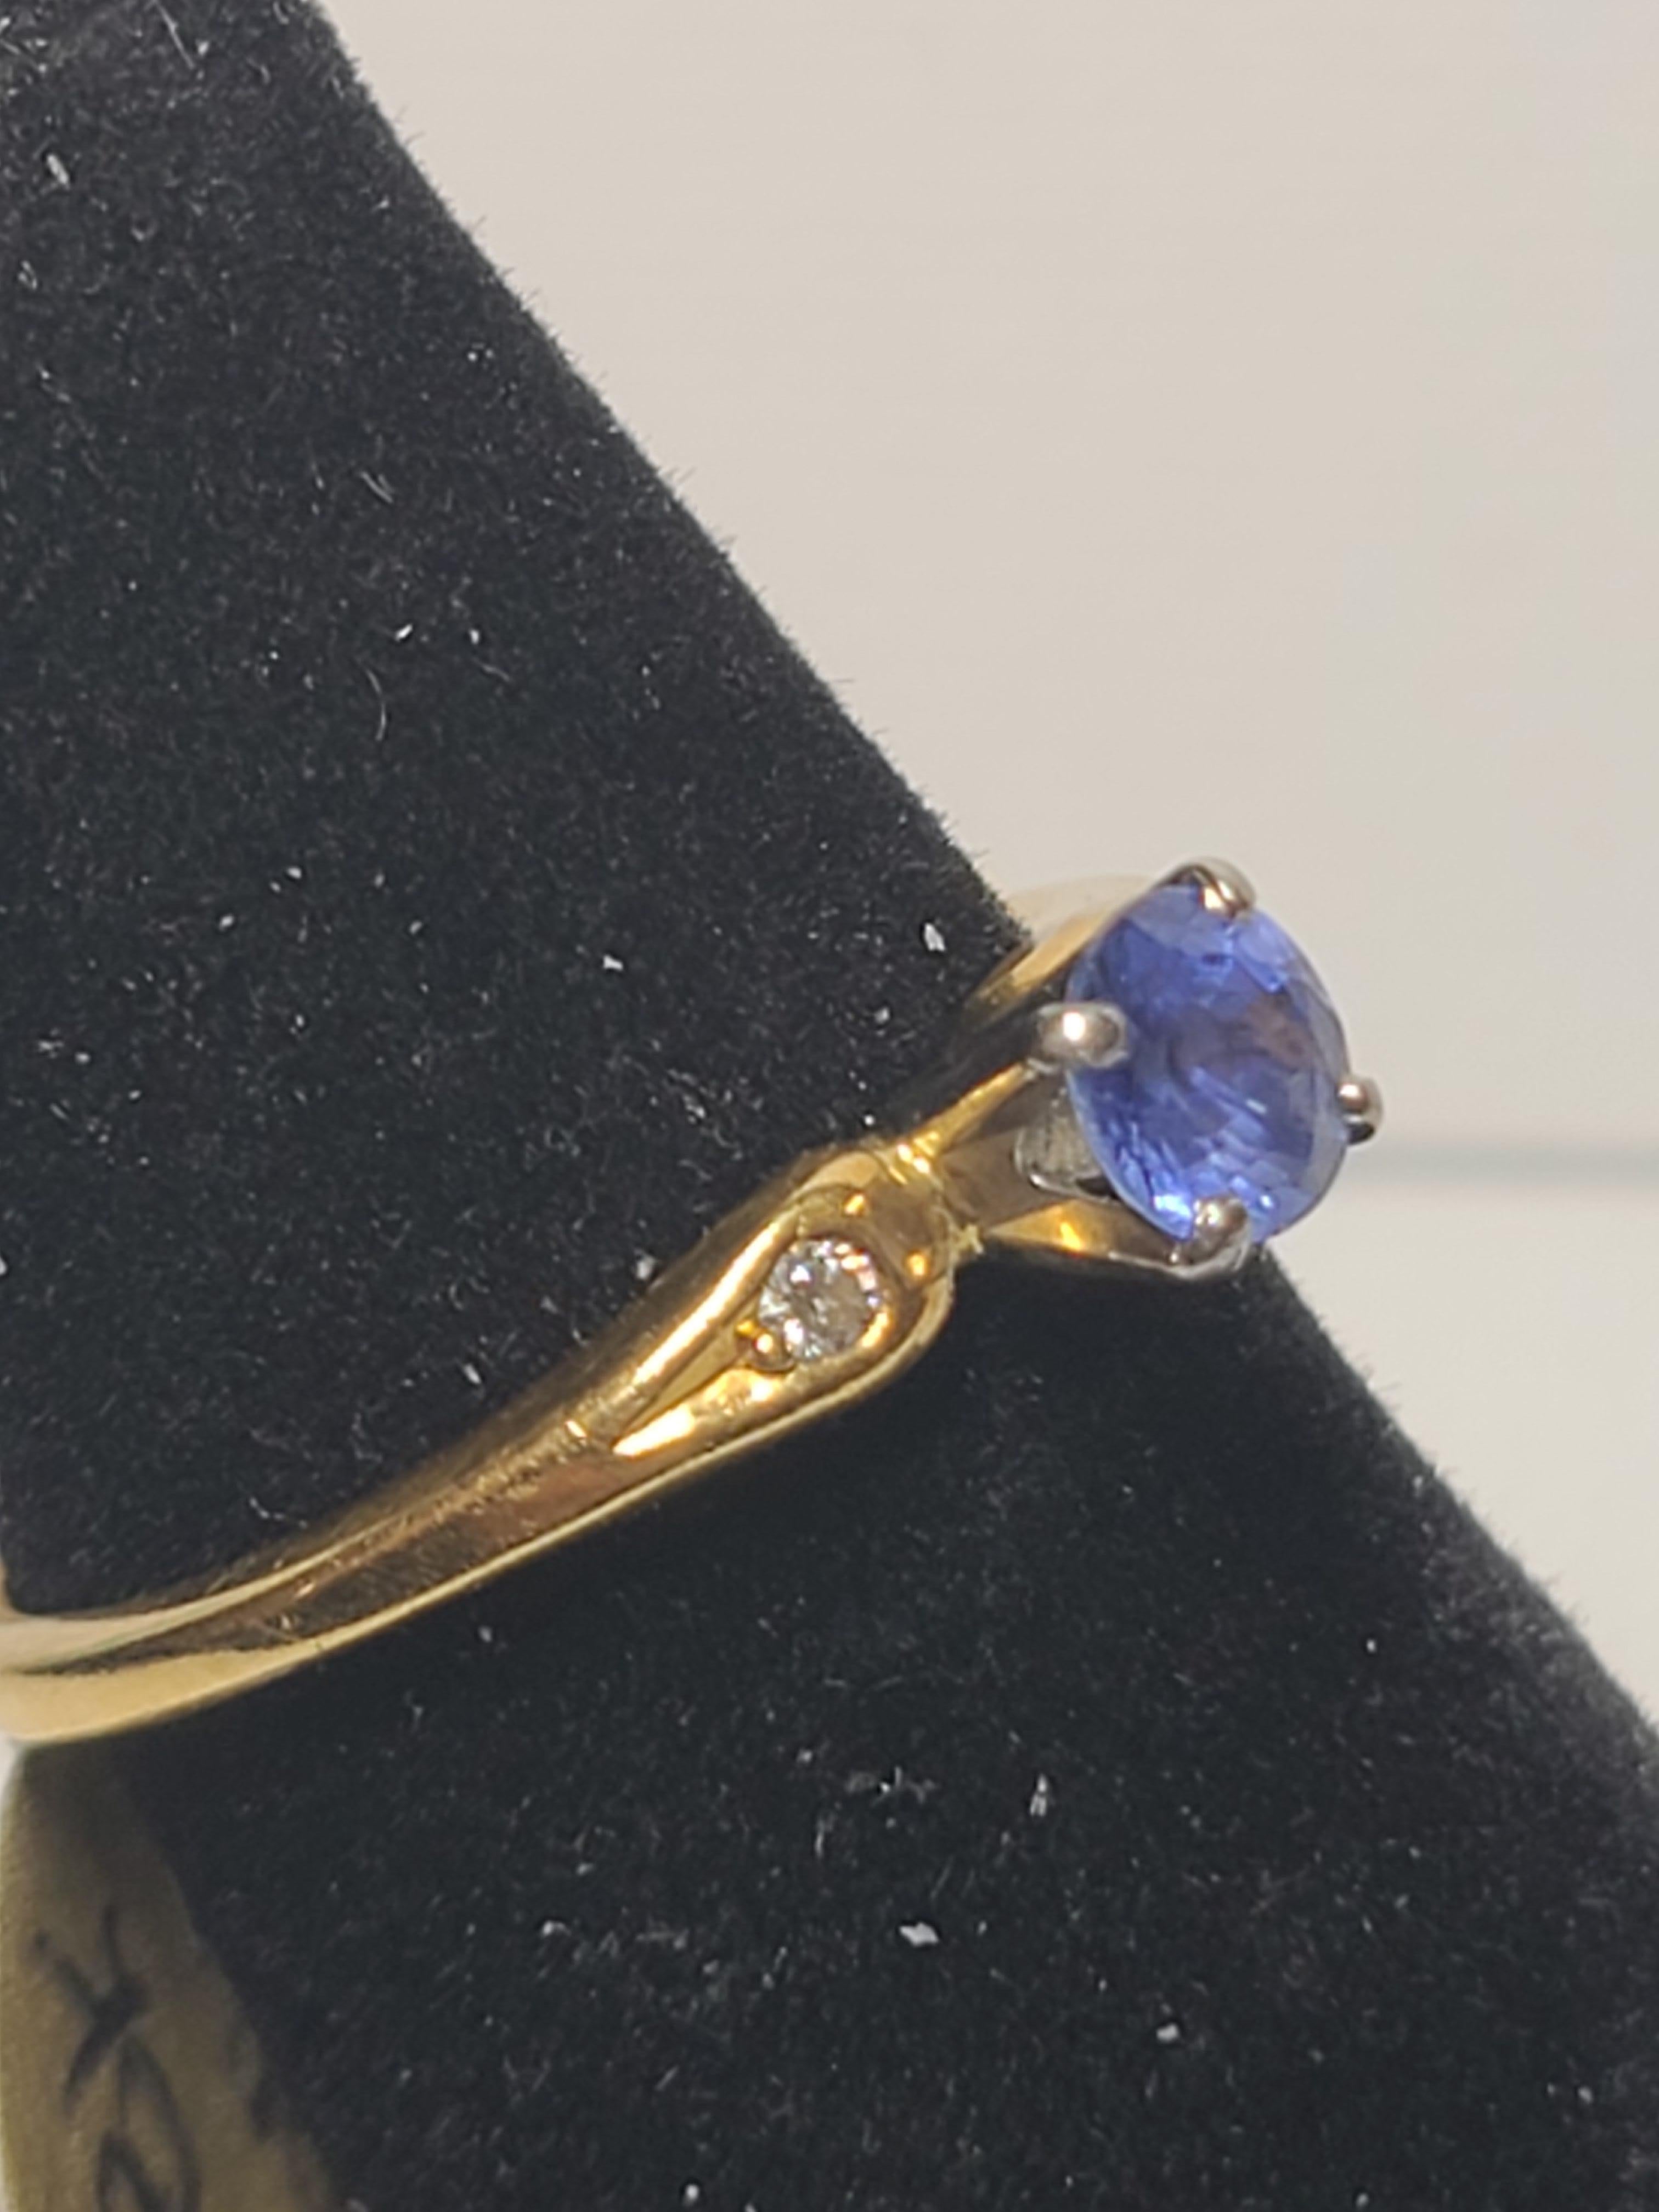 Round Cut Vintage Jabel 18k Yellow Gold Sapphire Ring with Diamond Accents